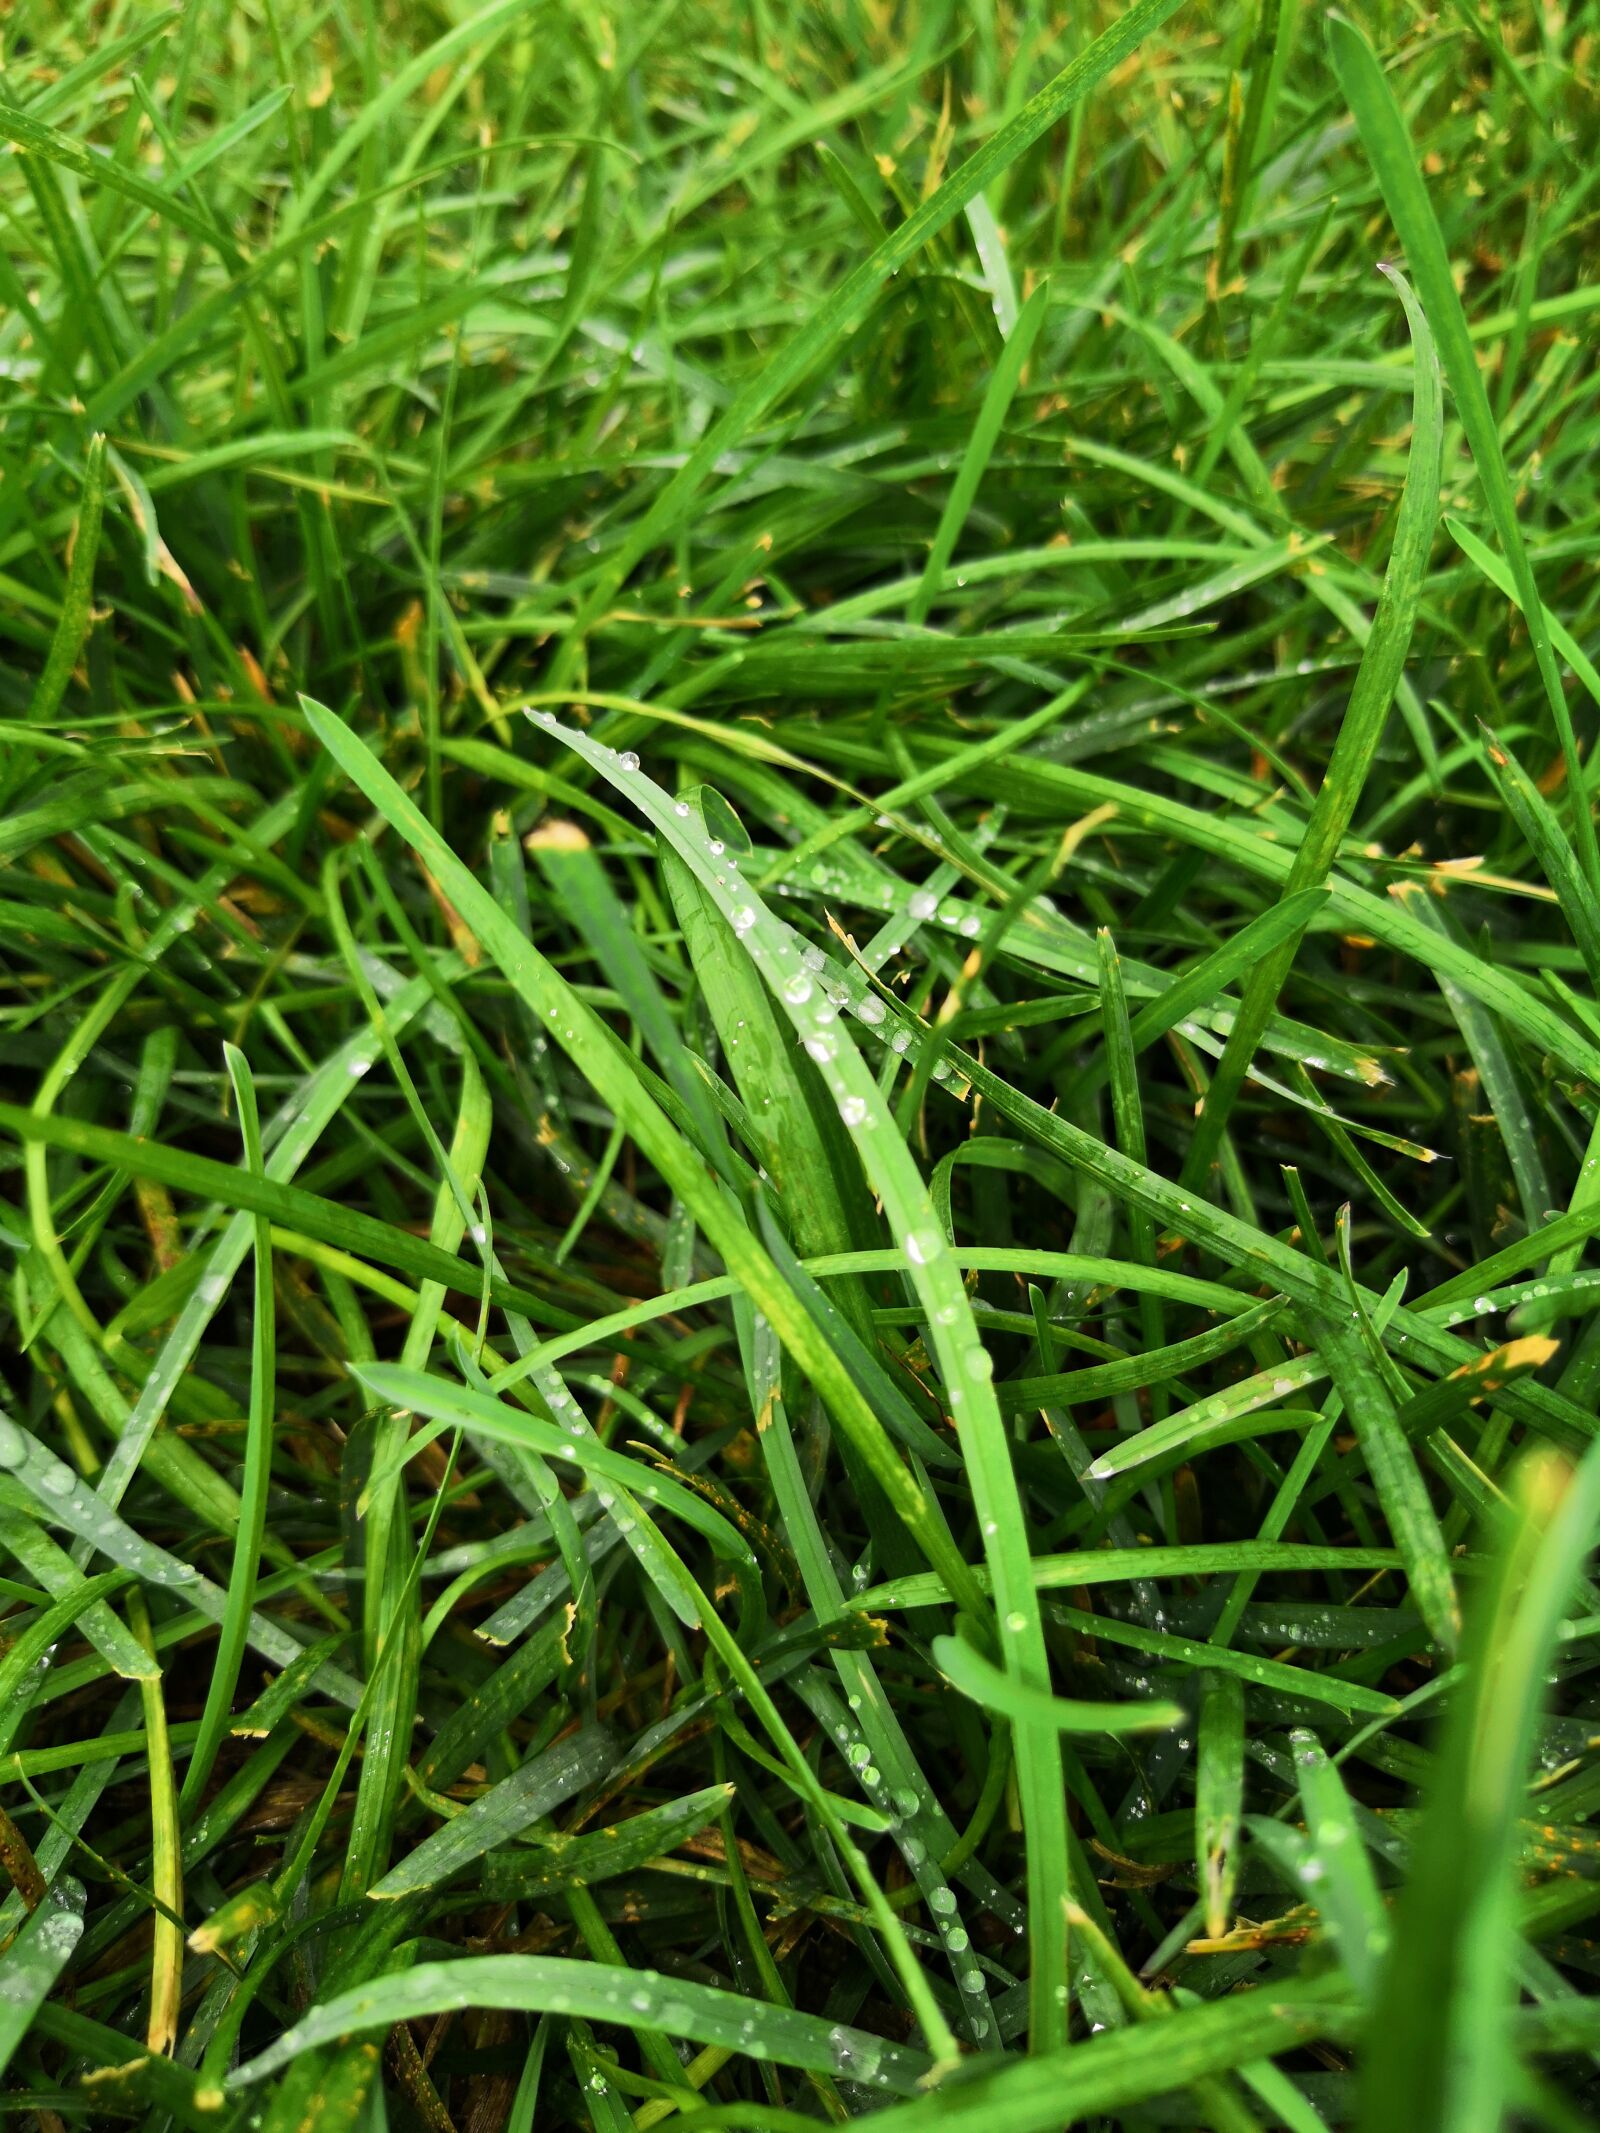 HUAWEI Honor View 10 sample photo. Grass, wet, dew photography